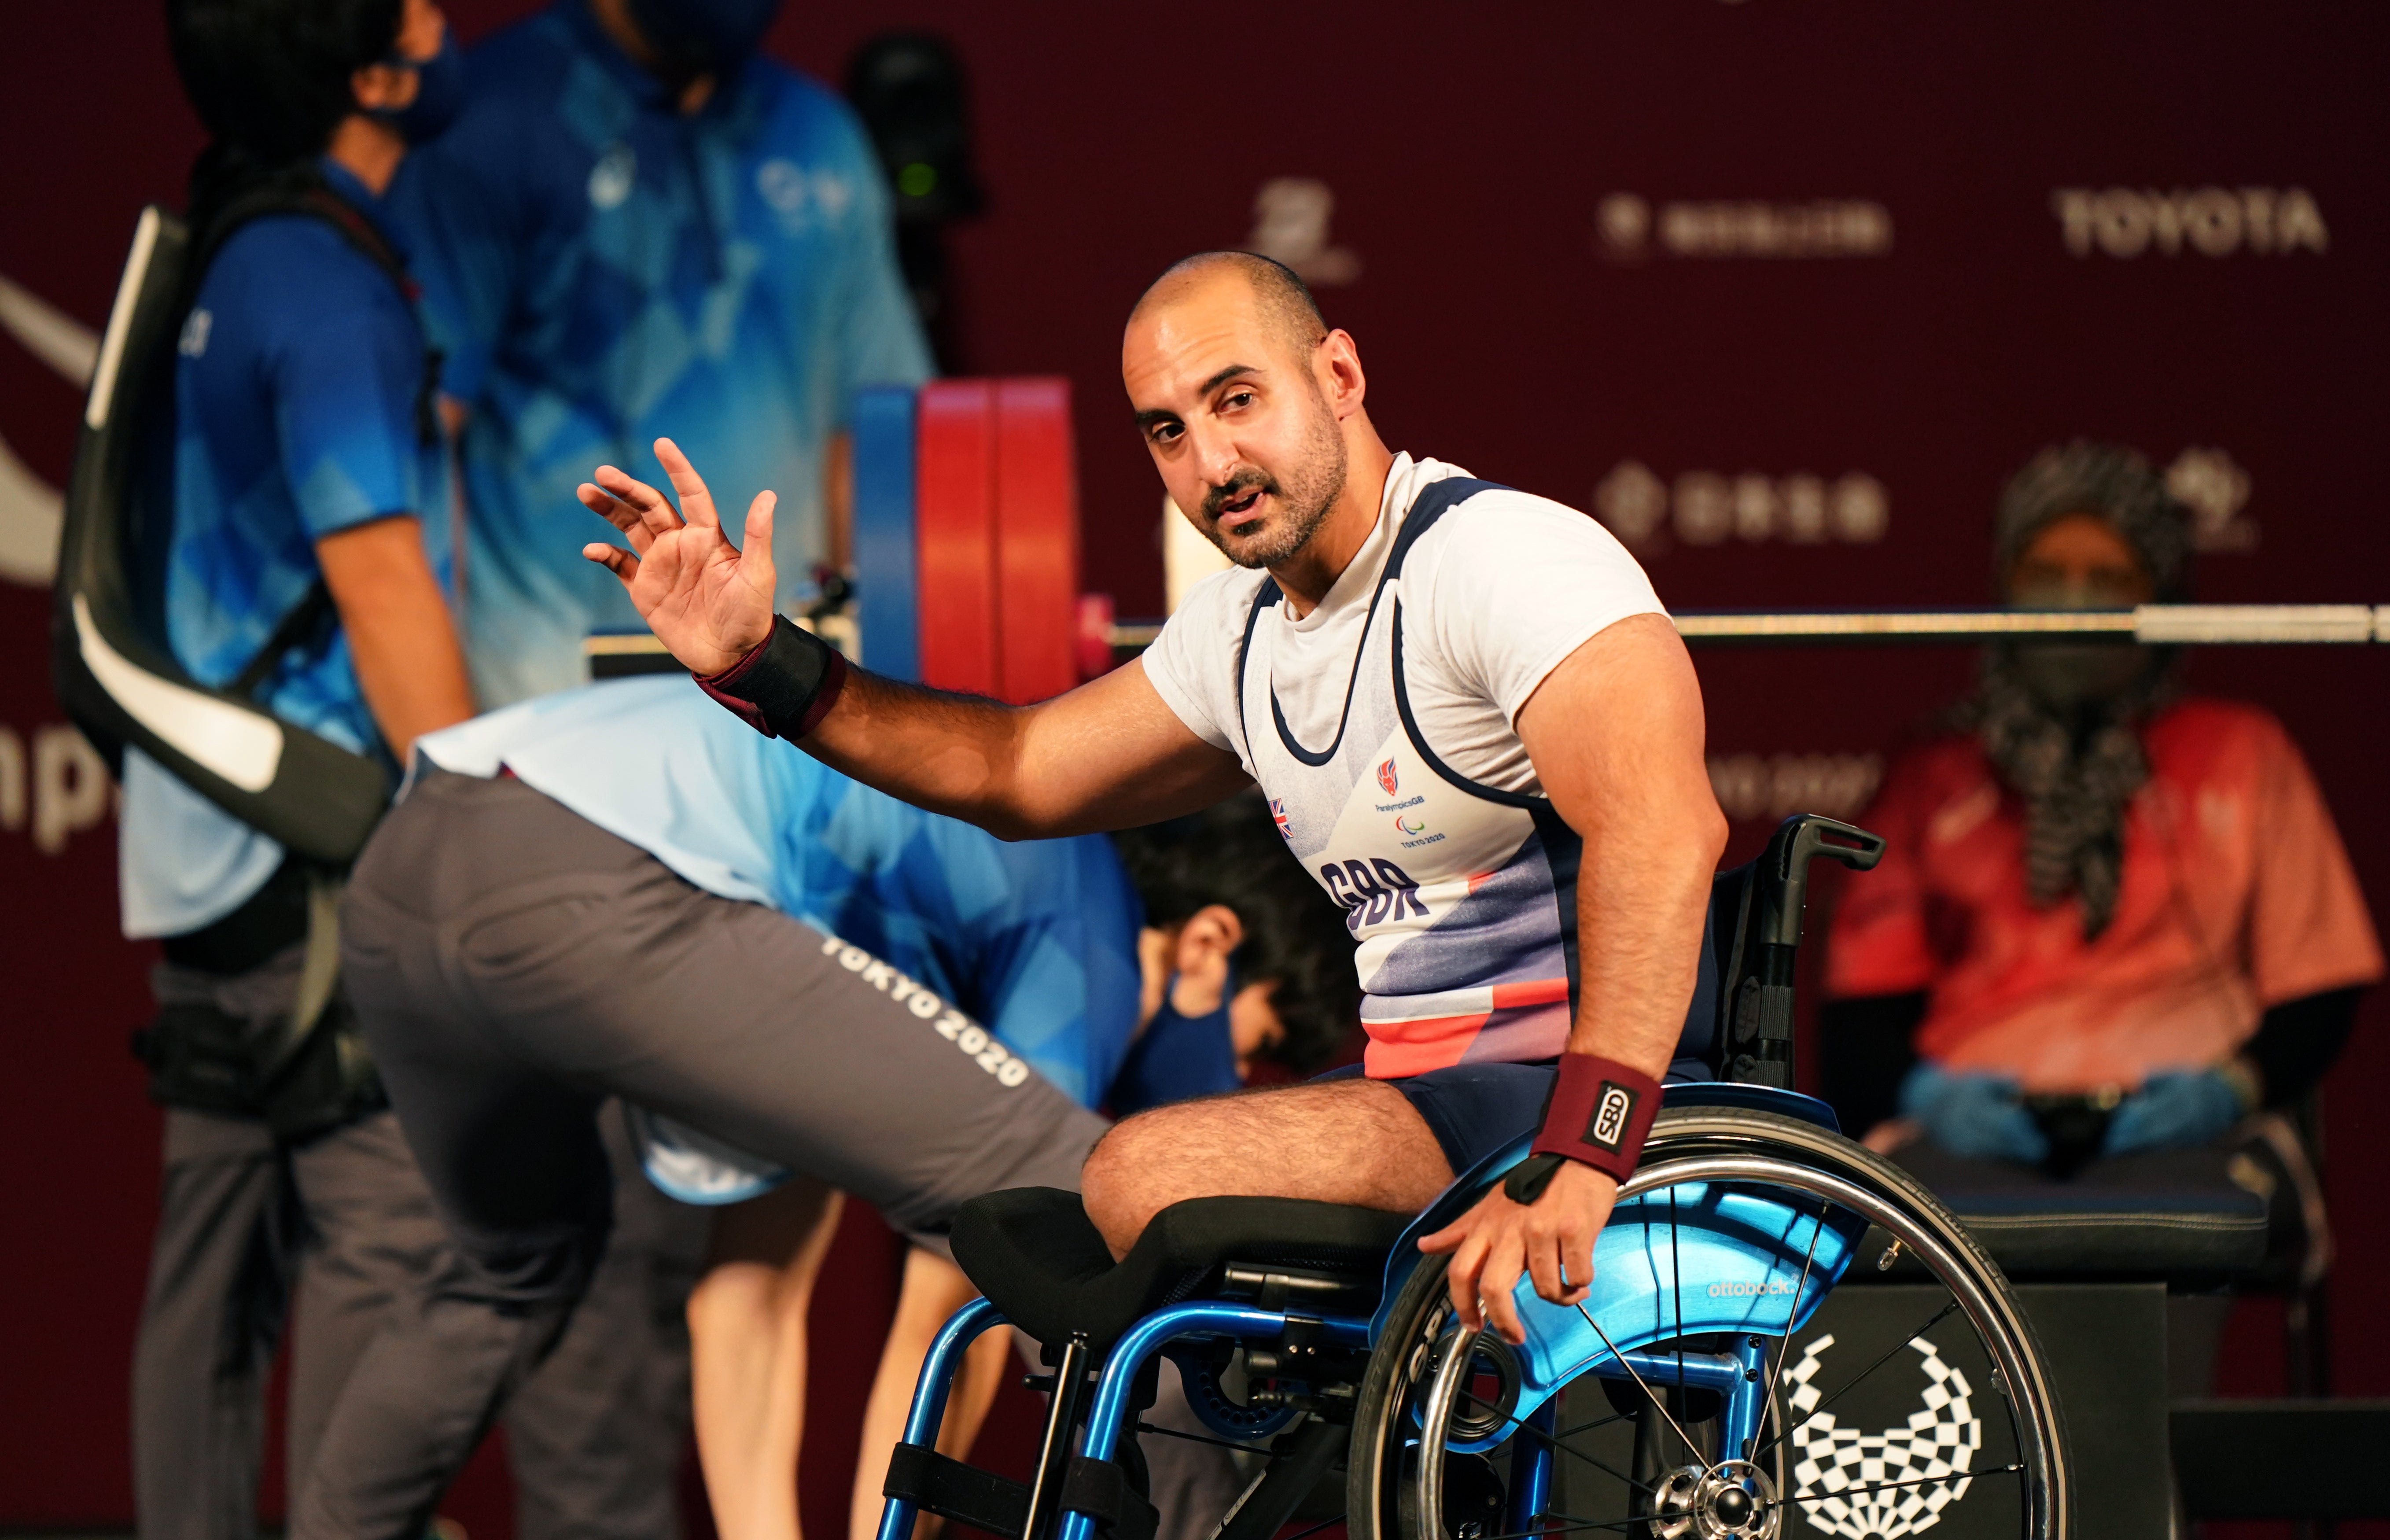 Ali Jawad said he would refuse to compete if he was going to the Winter Paralympics